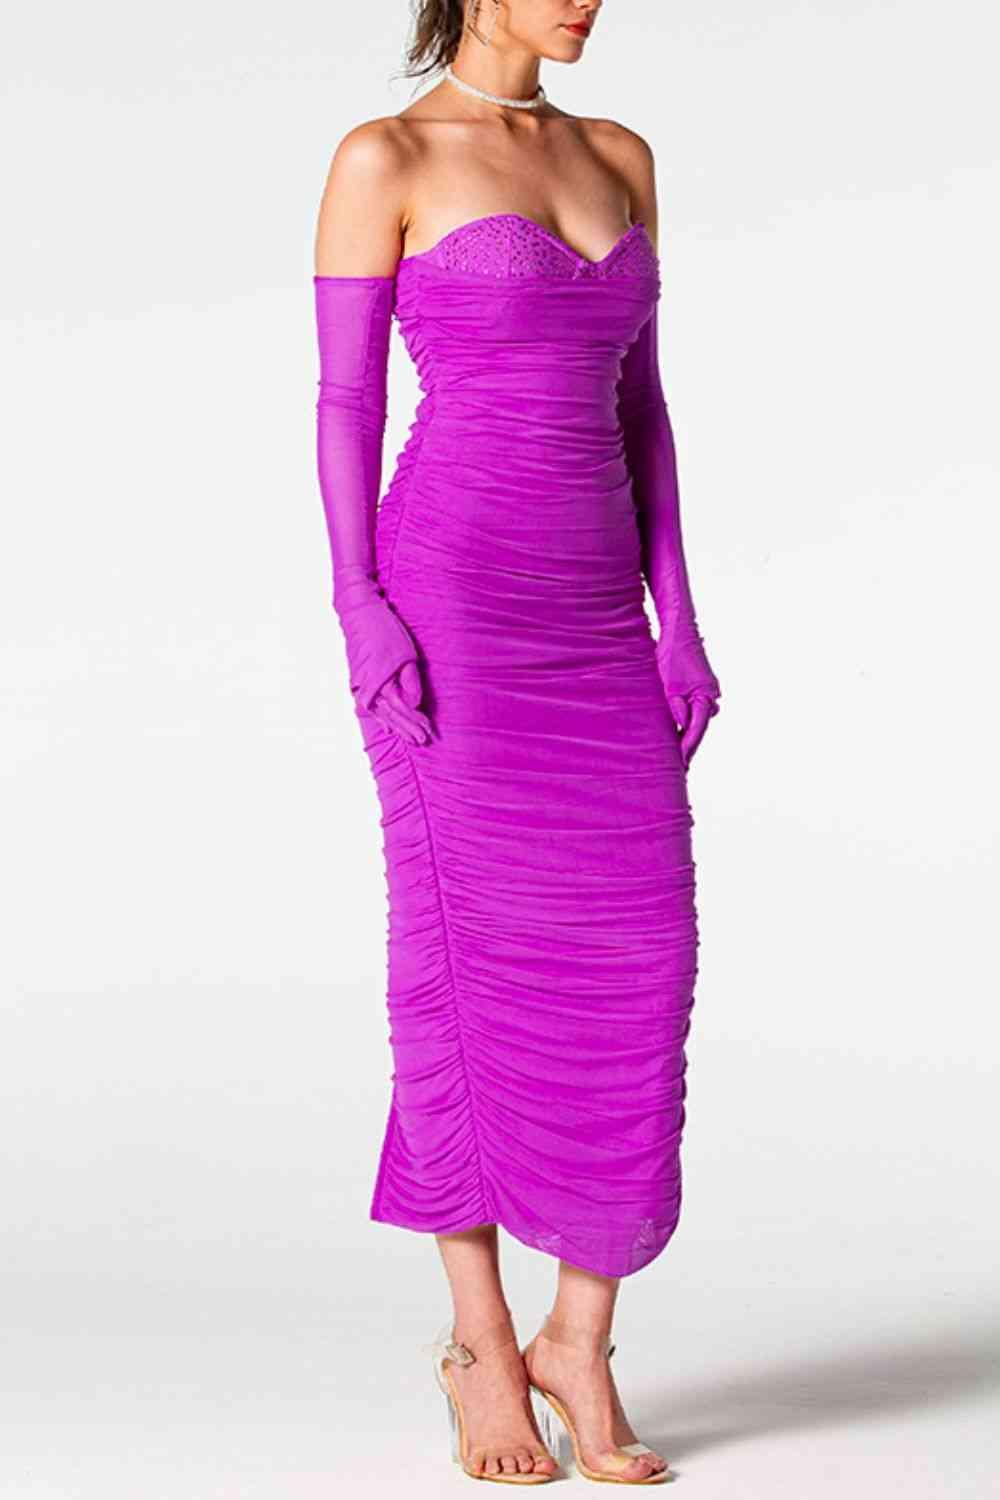 a woman in a purple dress is posing for a picture